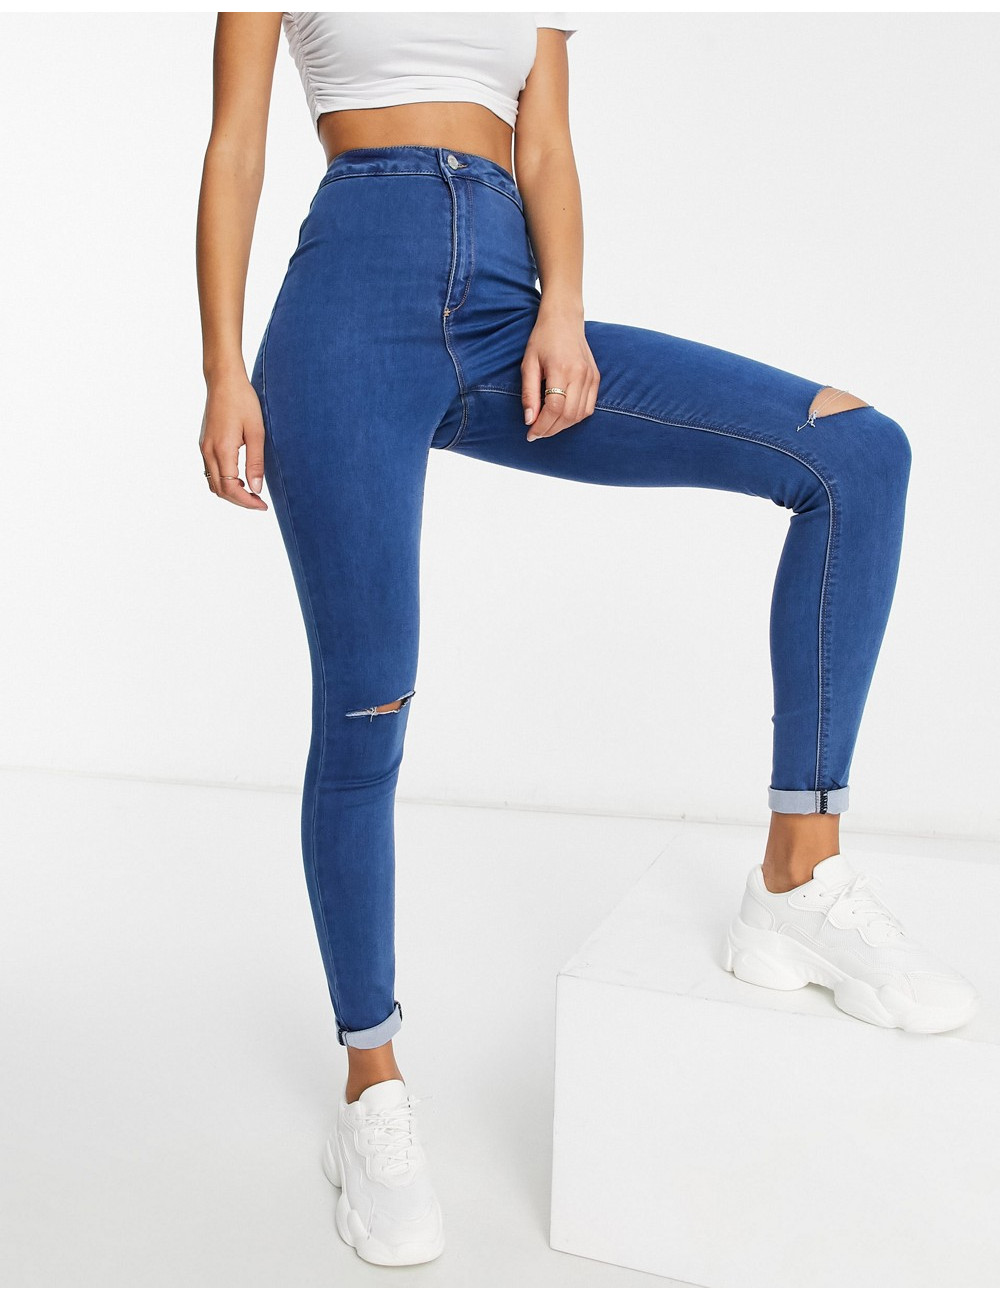 Missguided Tall vice jean...